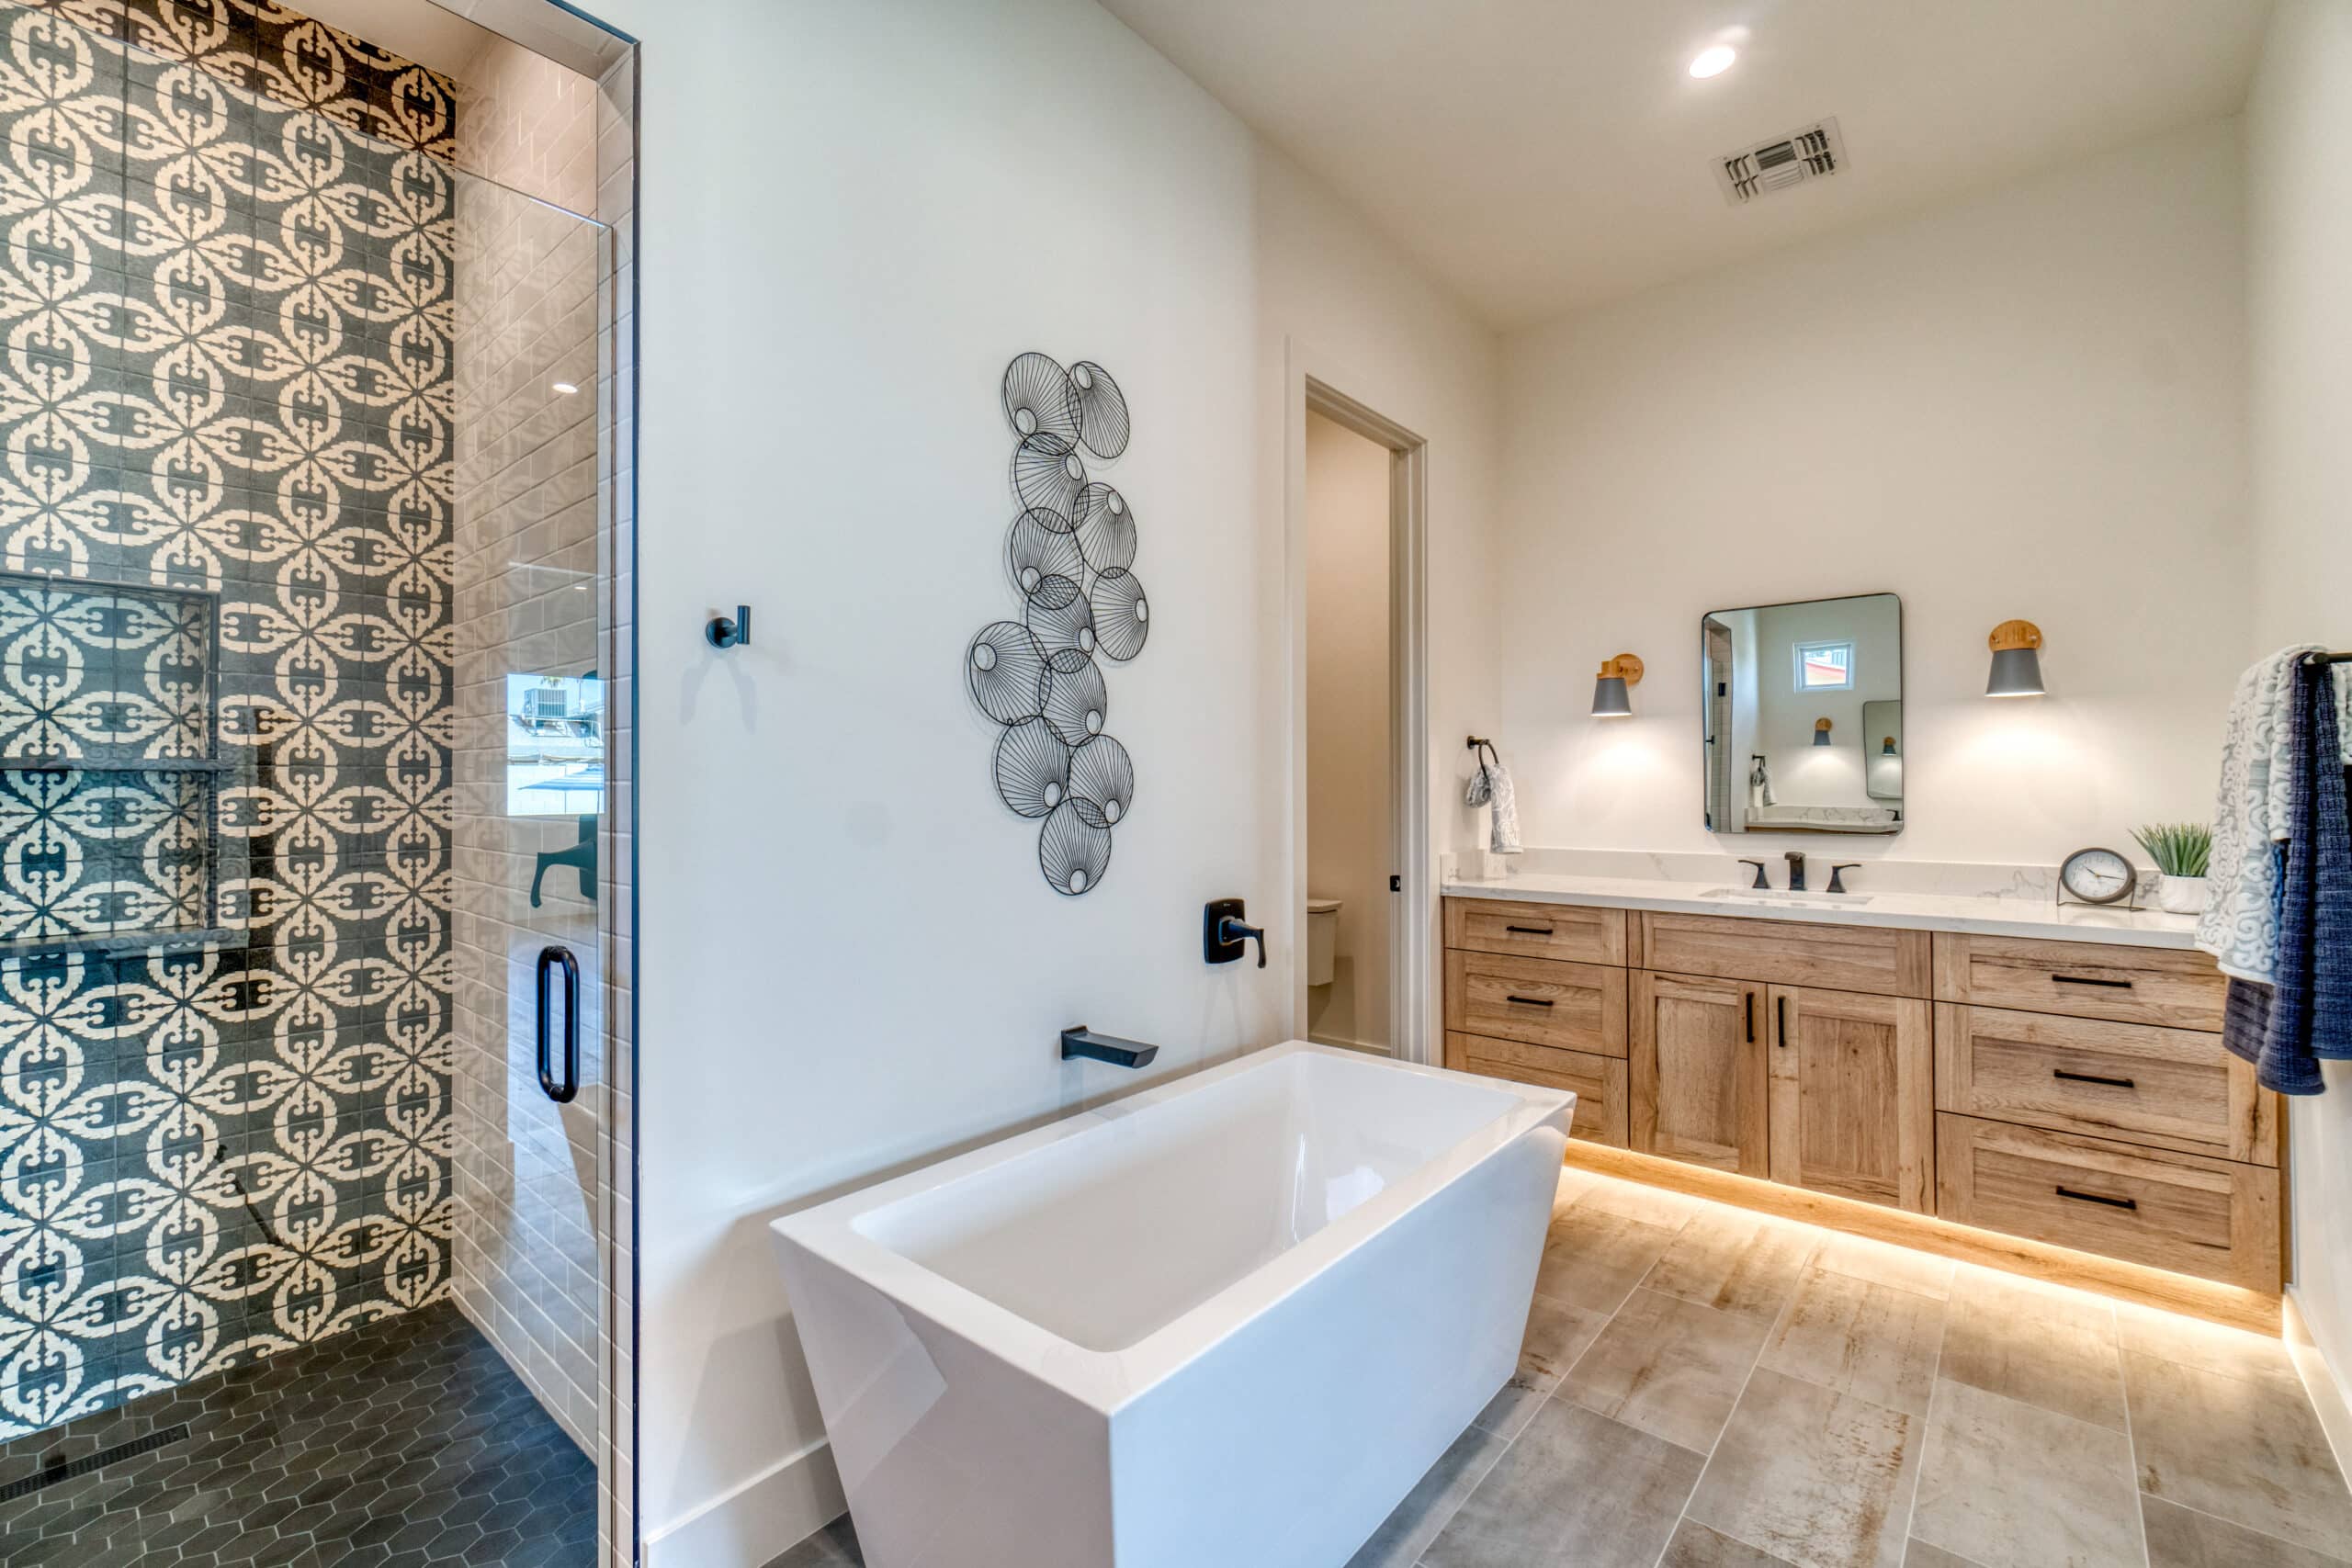 Traditional bathroom style with bath tub, brown single sink vanity, and a shower